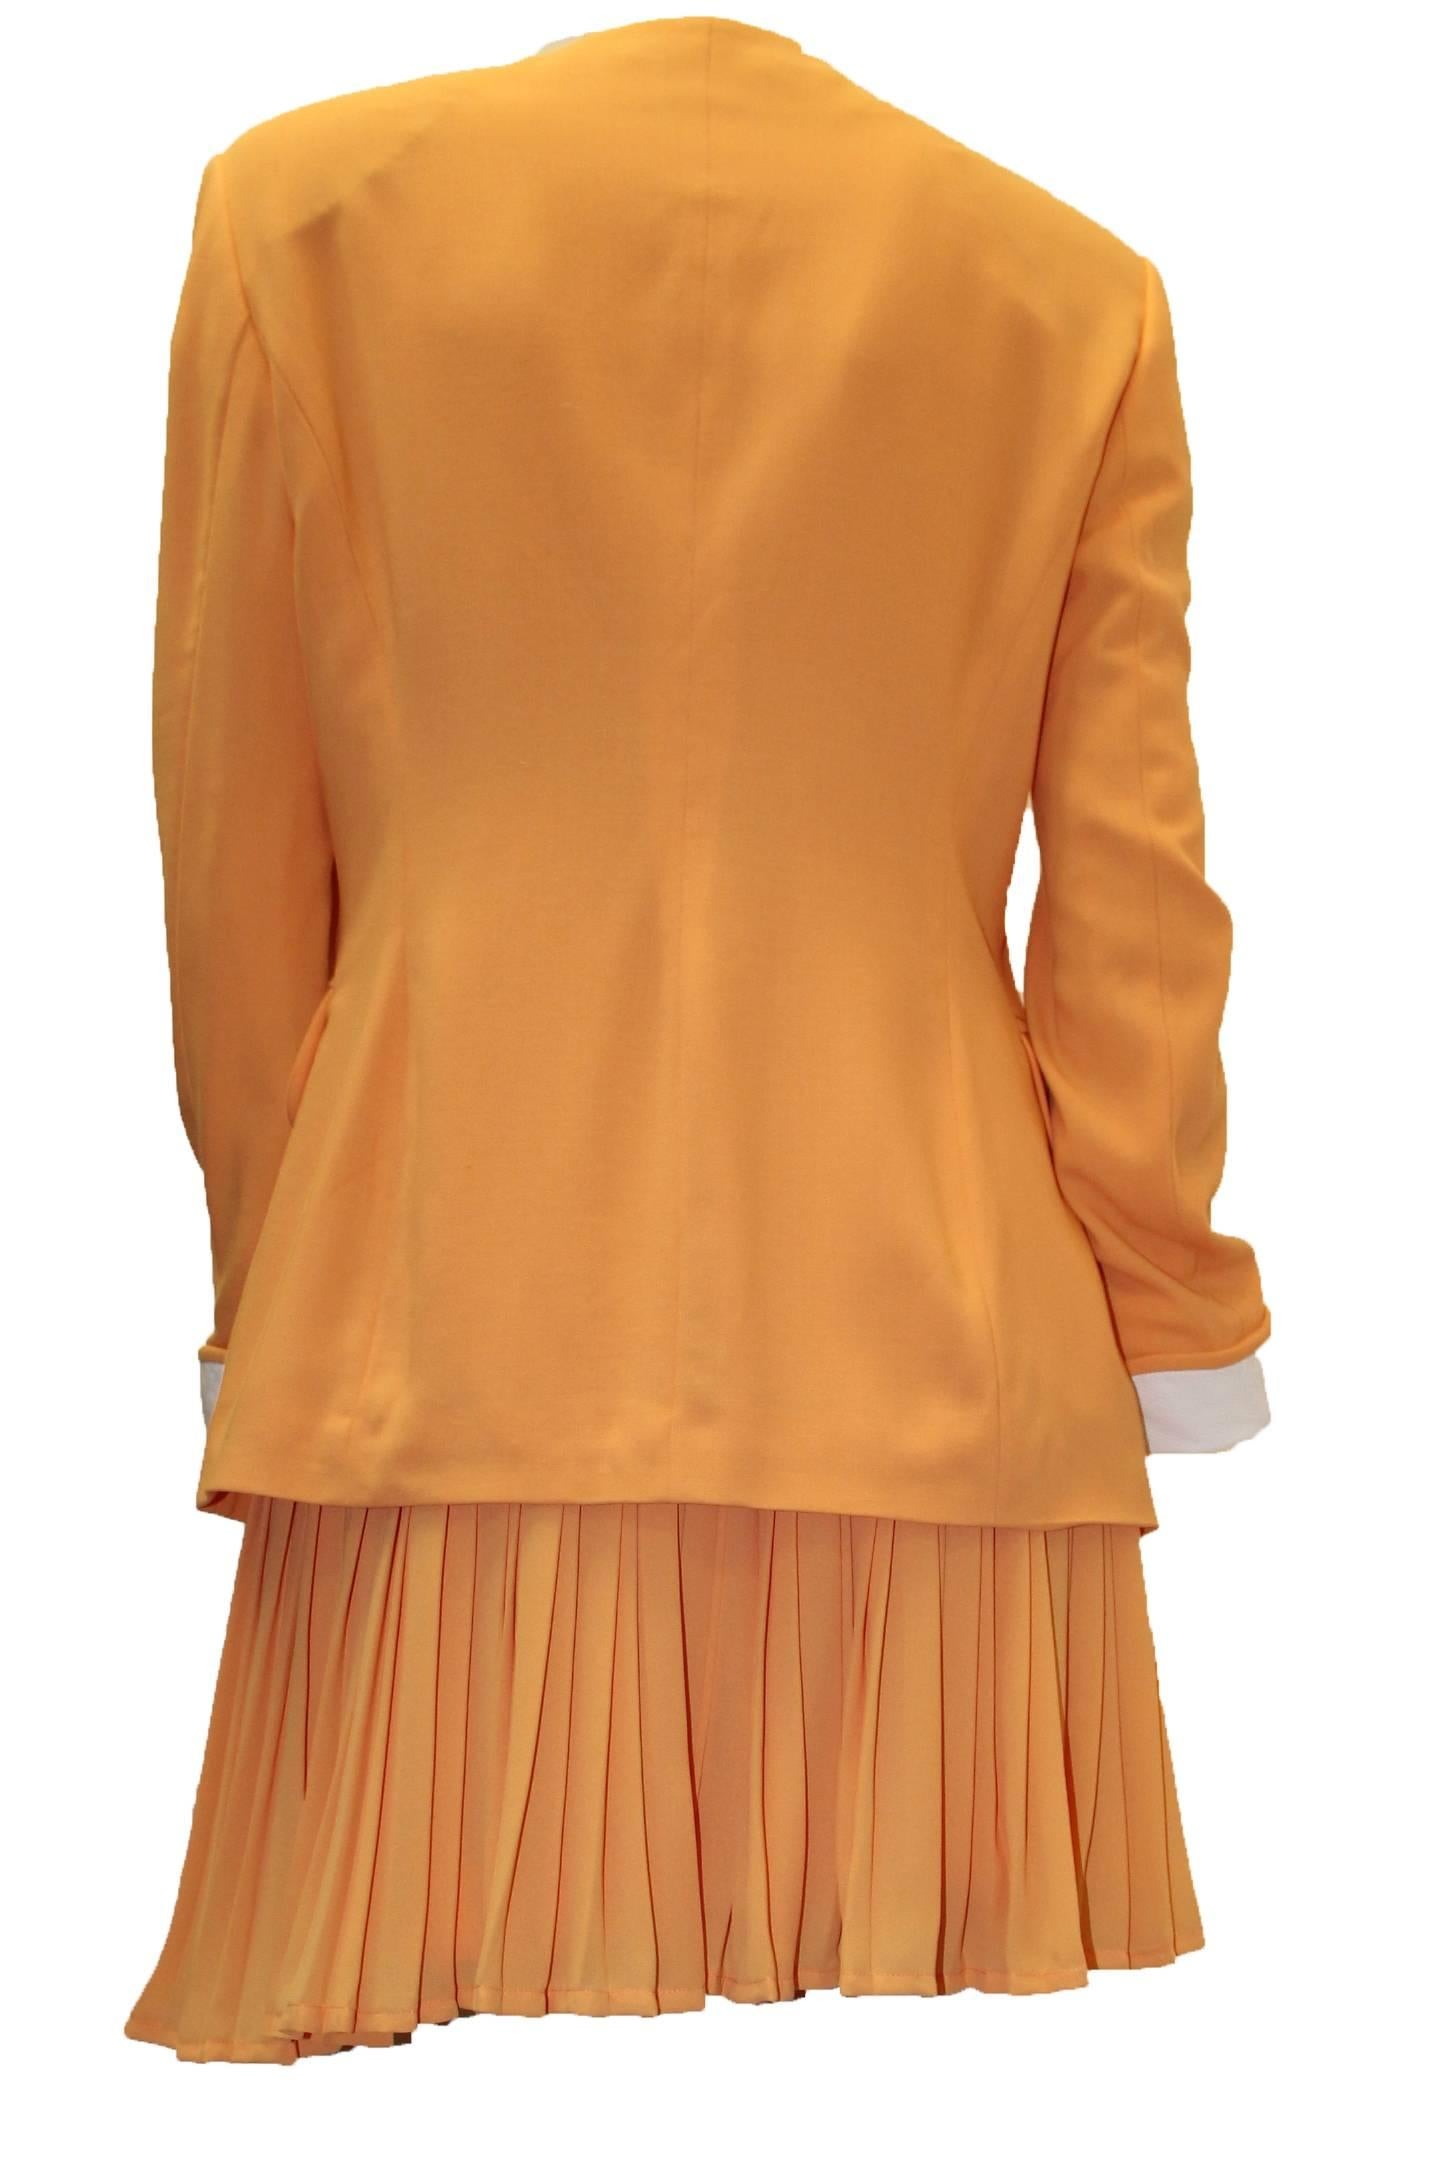 Orange 1980s Escada Two Piece Jacket and Skirt Set For Sale